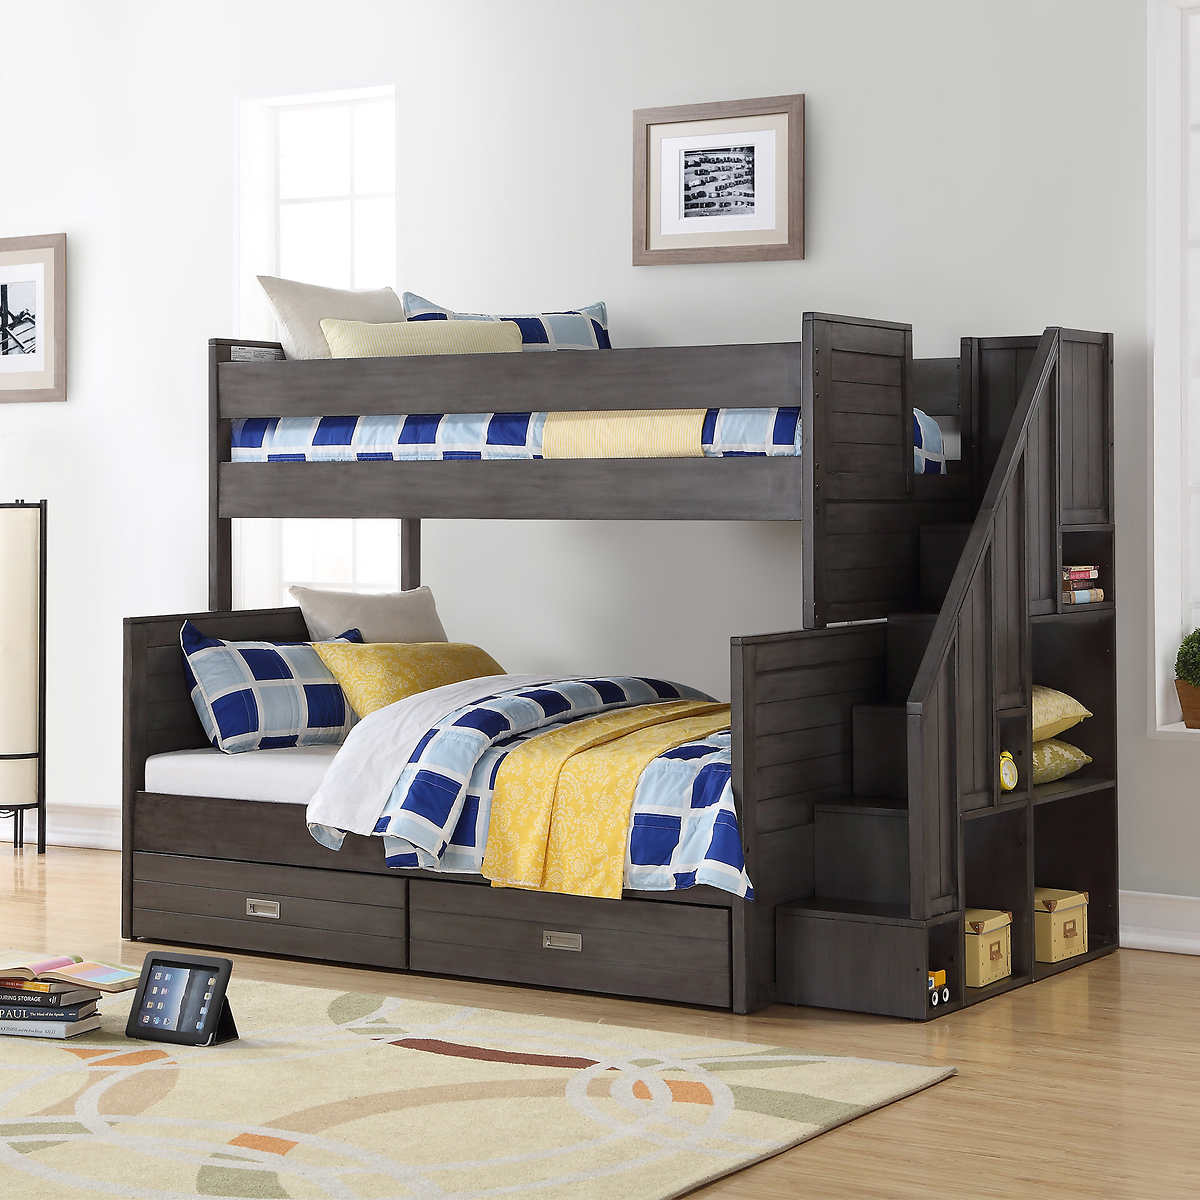 Caramia Kids Dylan Twin Over Full Bunk, Bunk Beds Twin Over Full With Storage